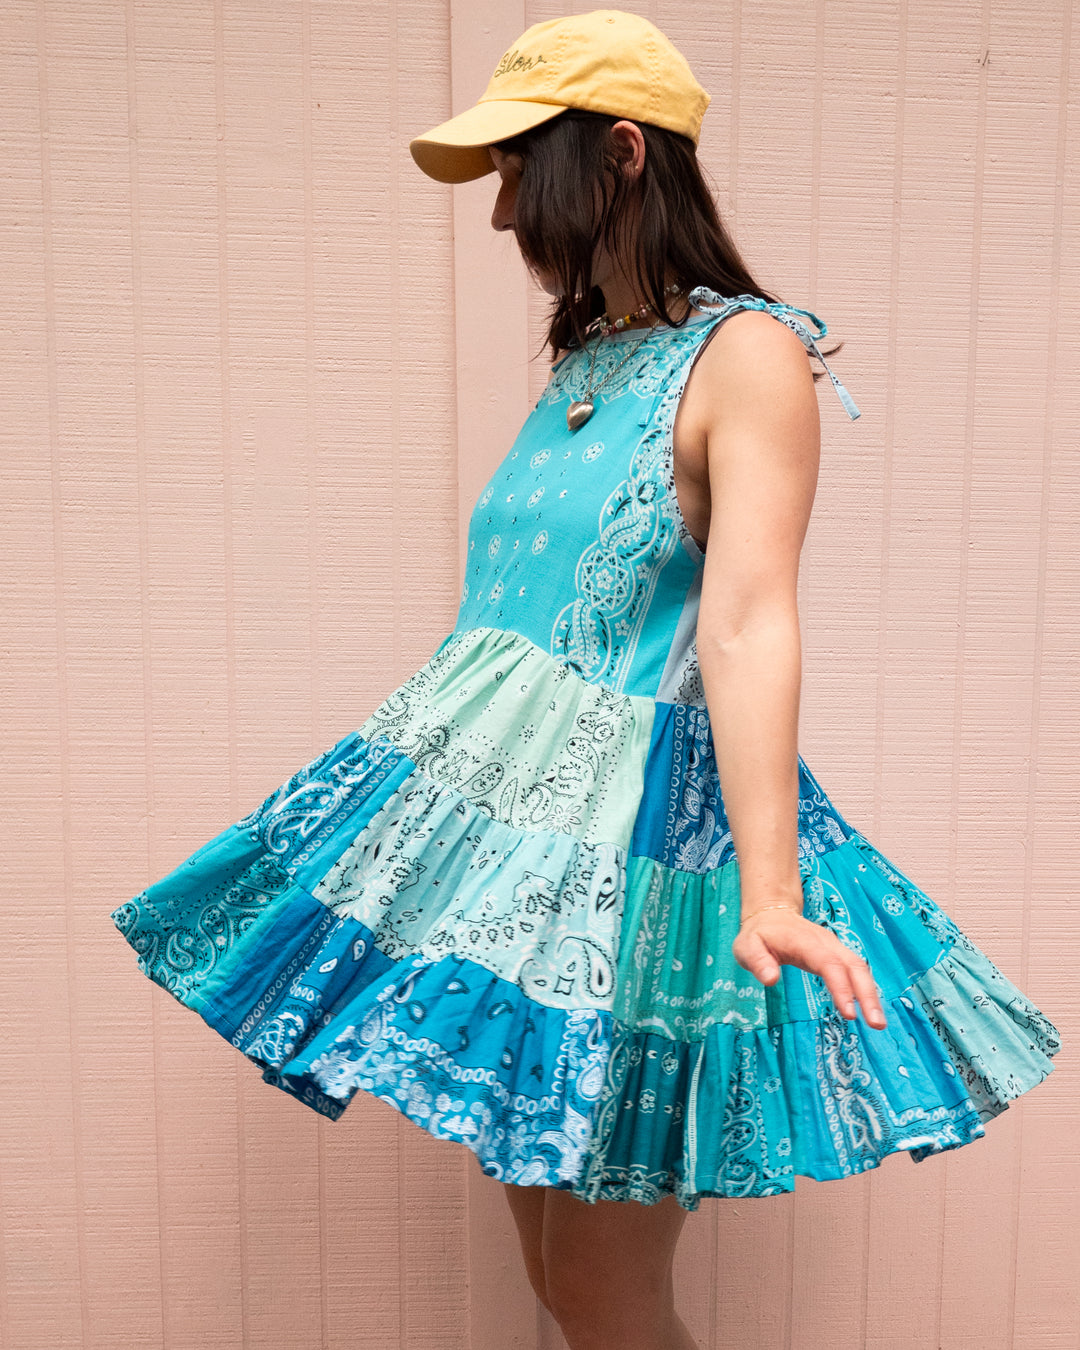 Dolly Bandana Dress - Mail in Your Own Materials